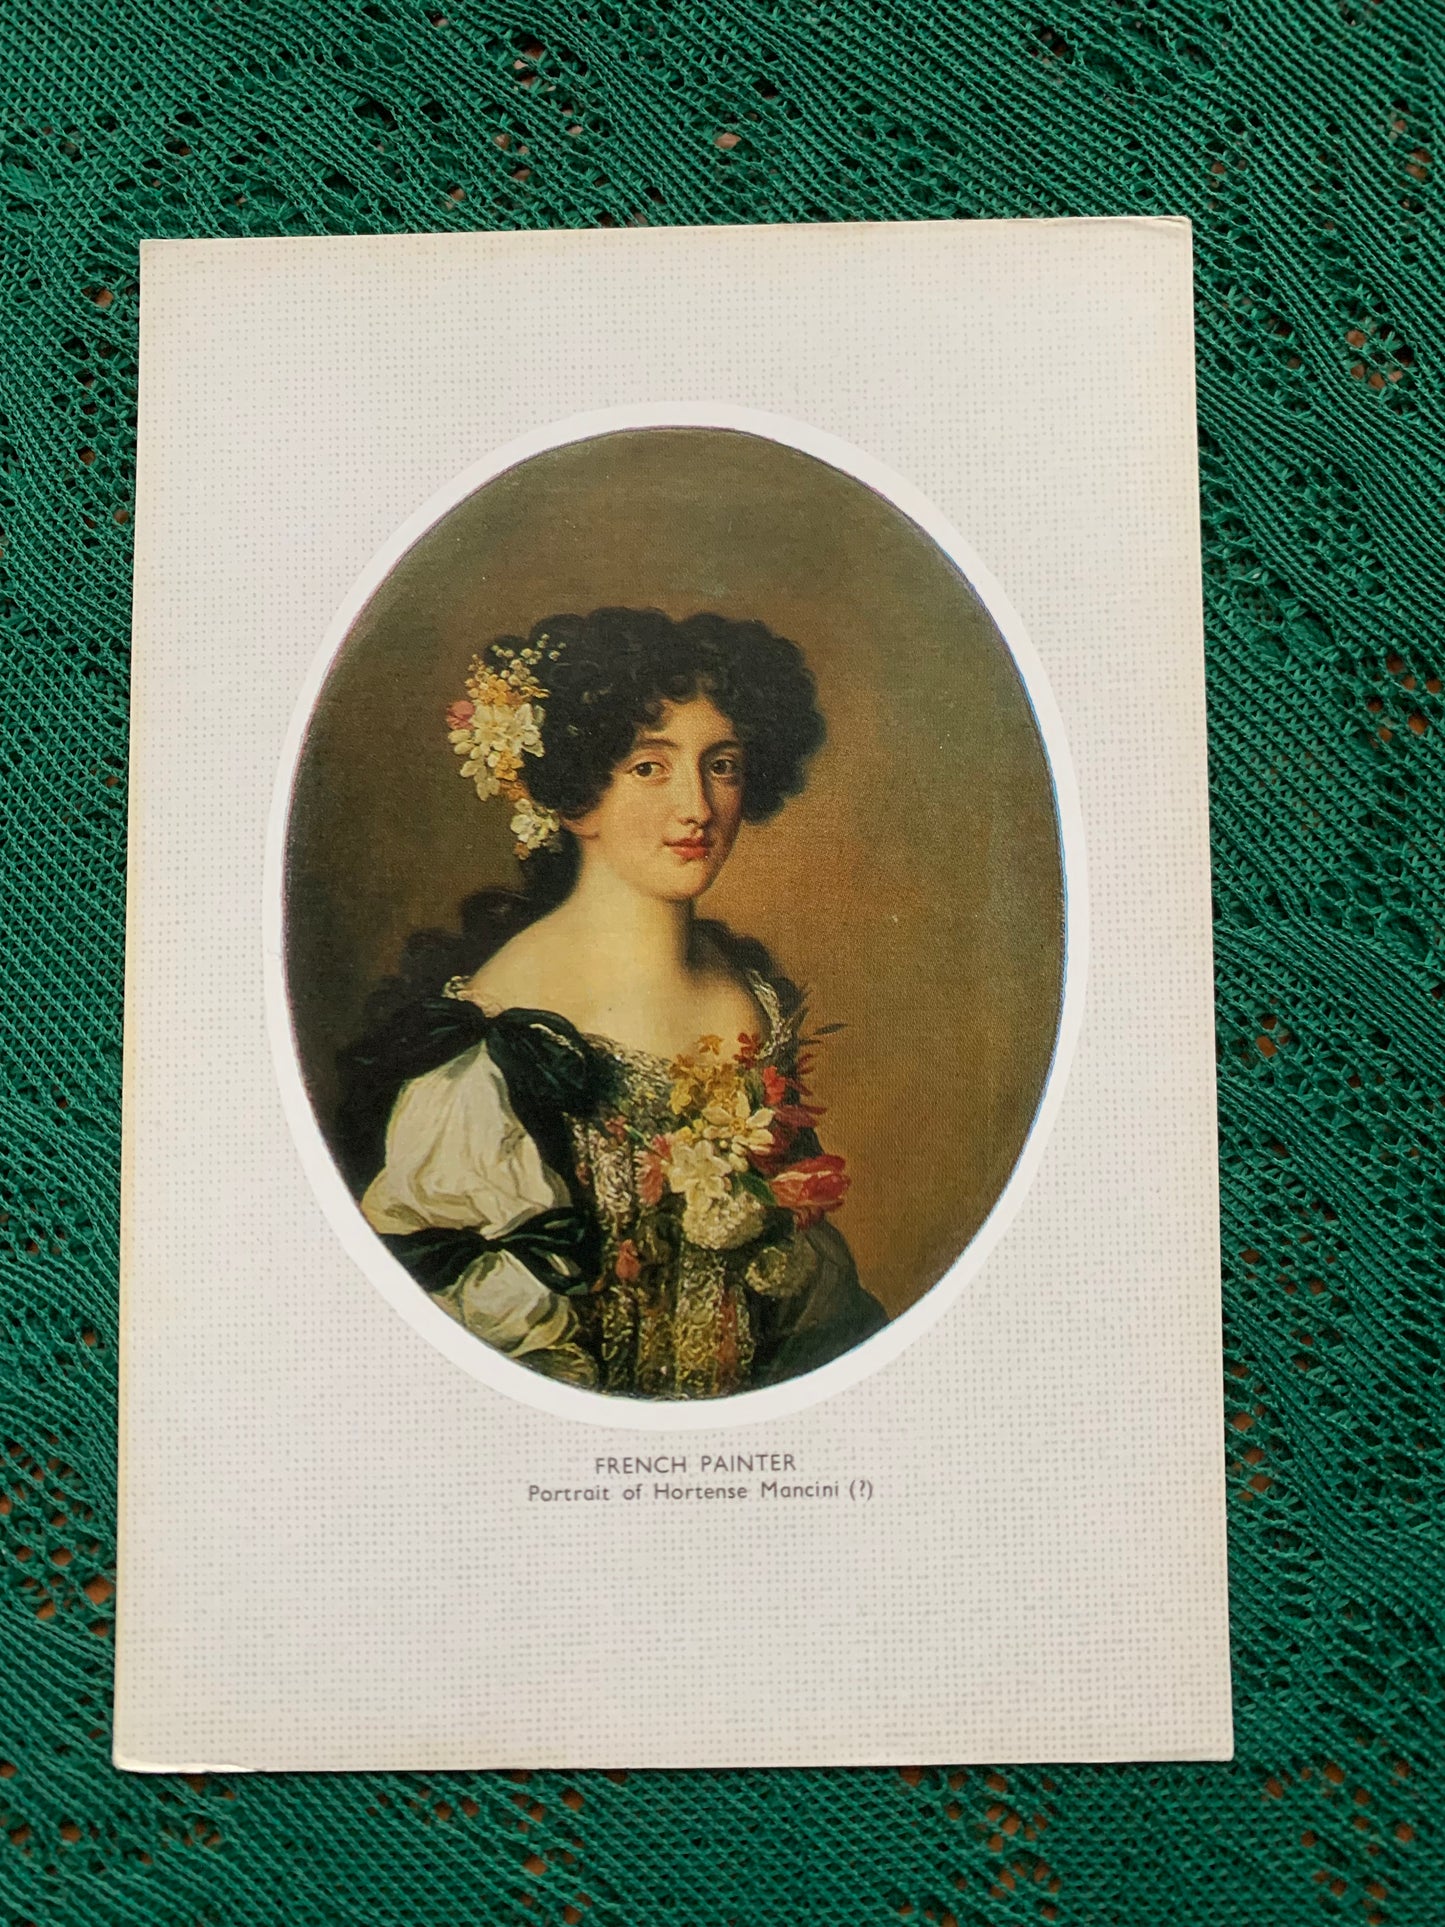 Russian art postcard - Unknown FRENCH PAINTER Portrait of Hortense Mancini (?) - Printed in USSR - 1983 - unused